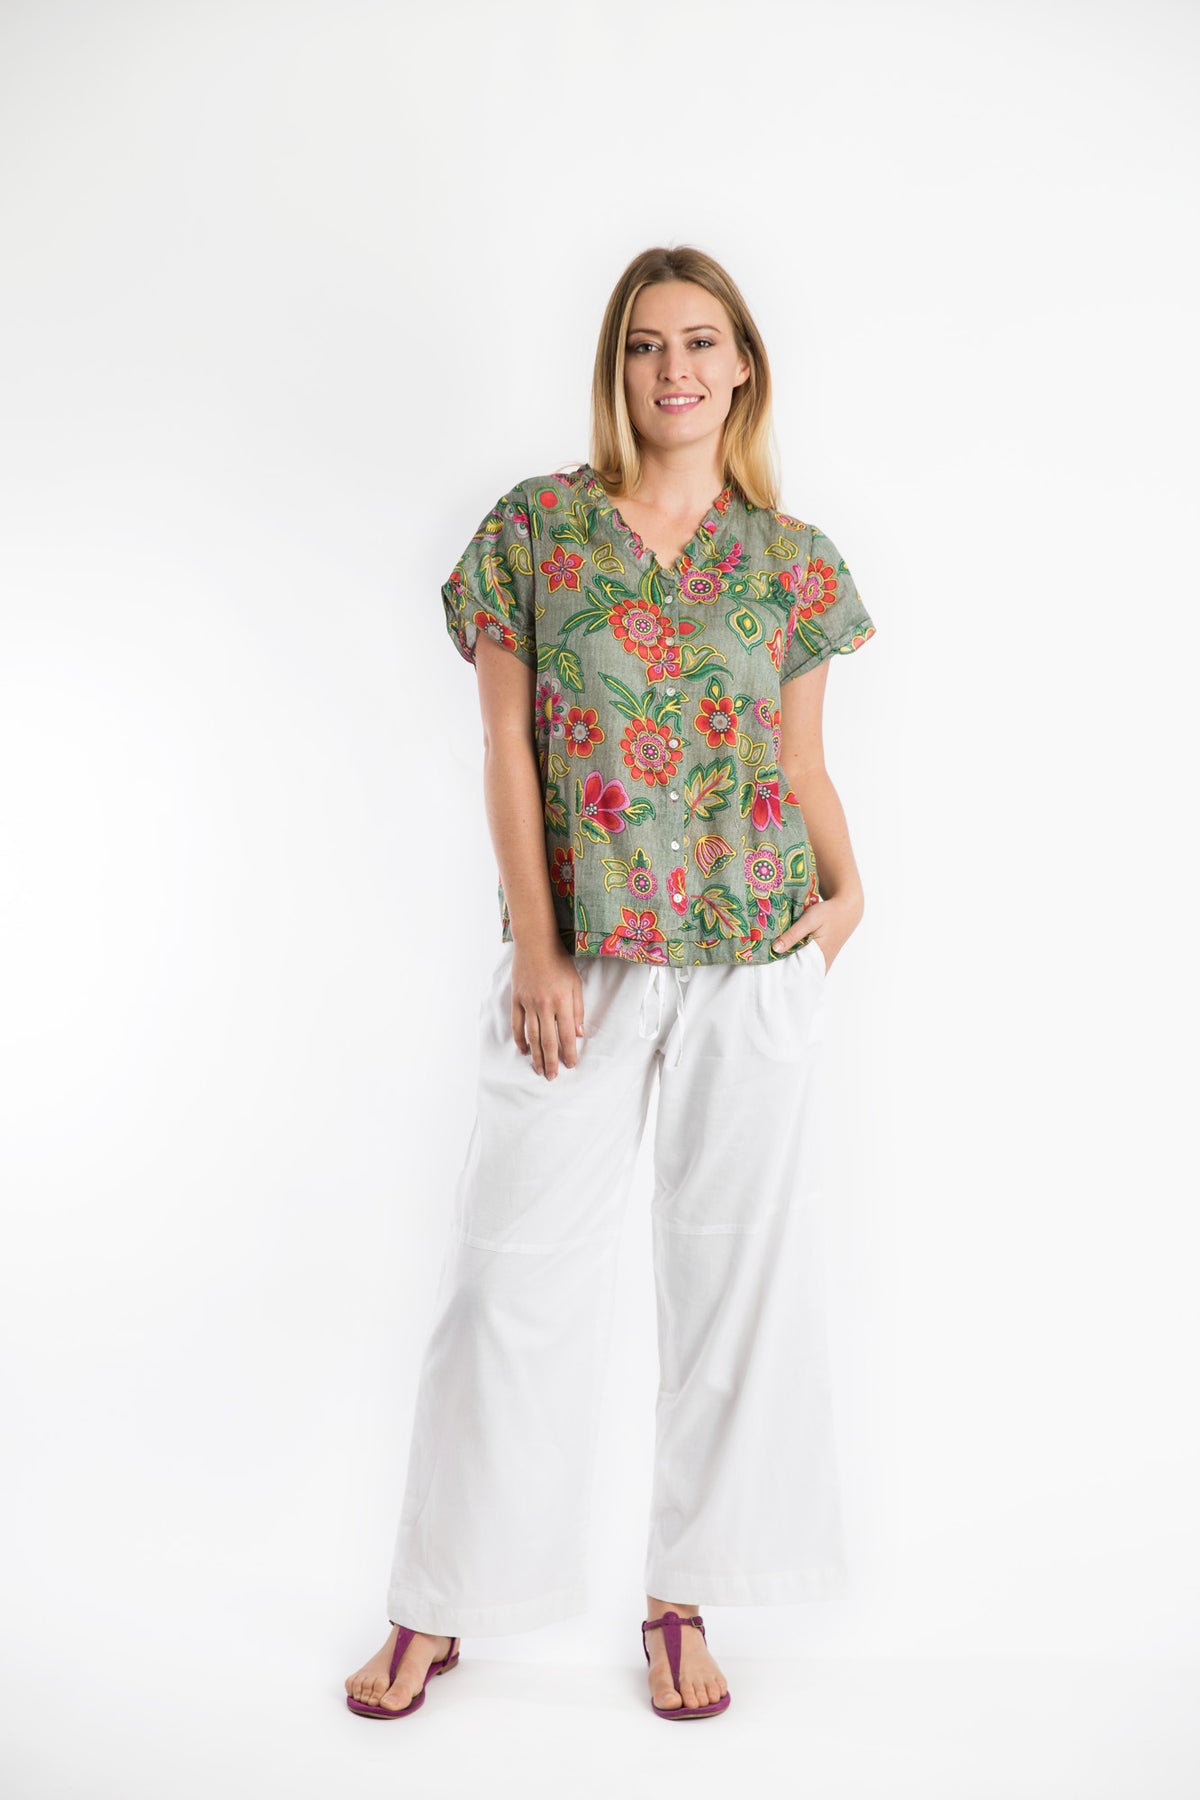 Capricorn waist length shirt in Olive Floral